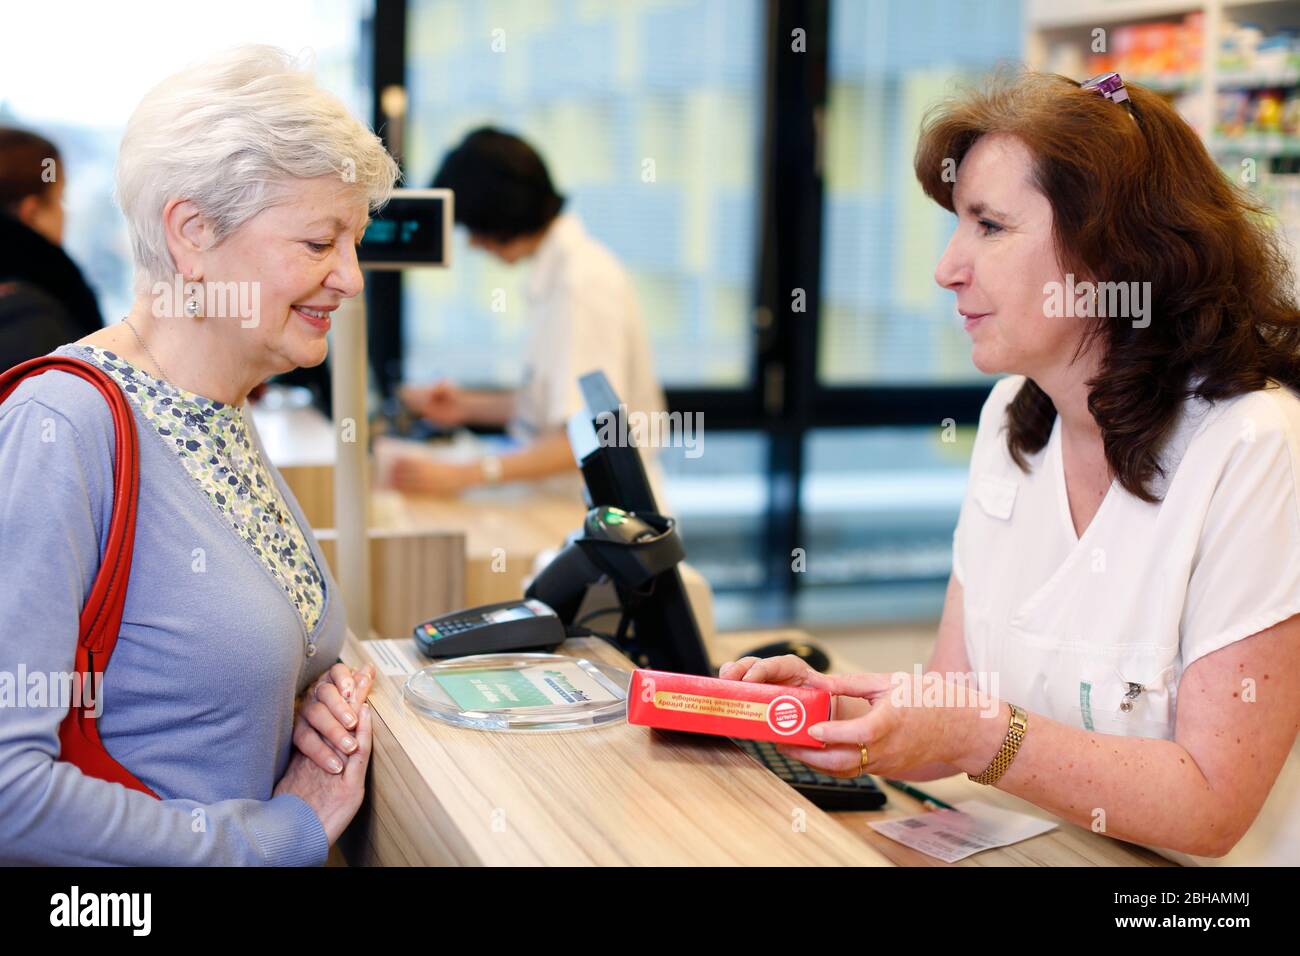 Customer speaks with the pharmacist in a pharmacy Stock Photo